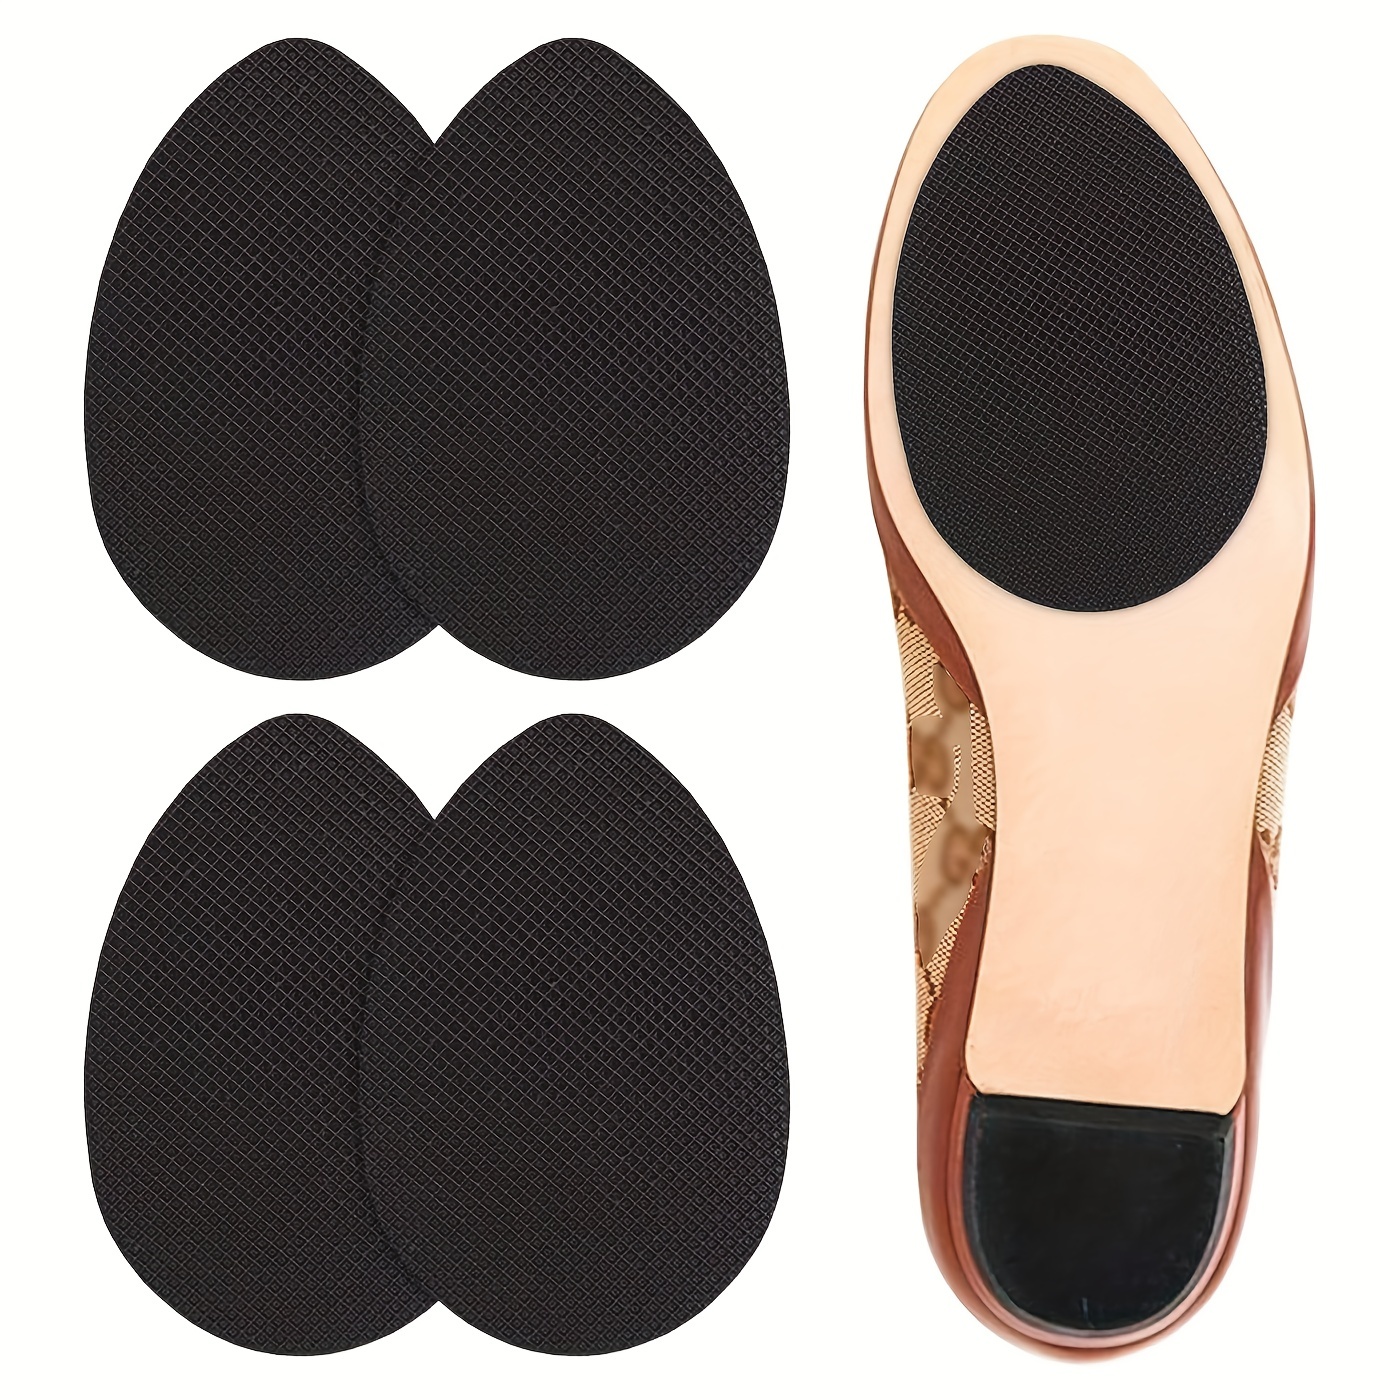 Non-slip Shoes Pads Adhesive Shoe Sole Protectors, High Heels Anti